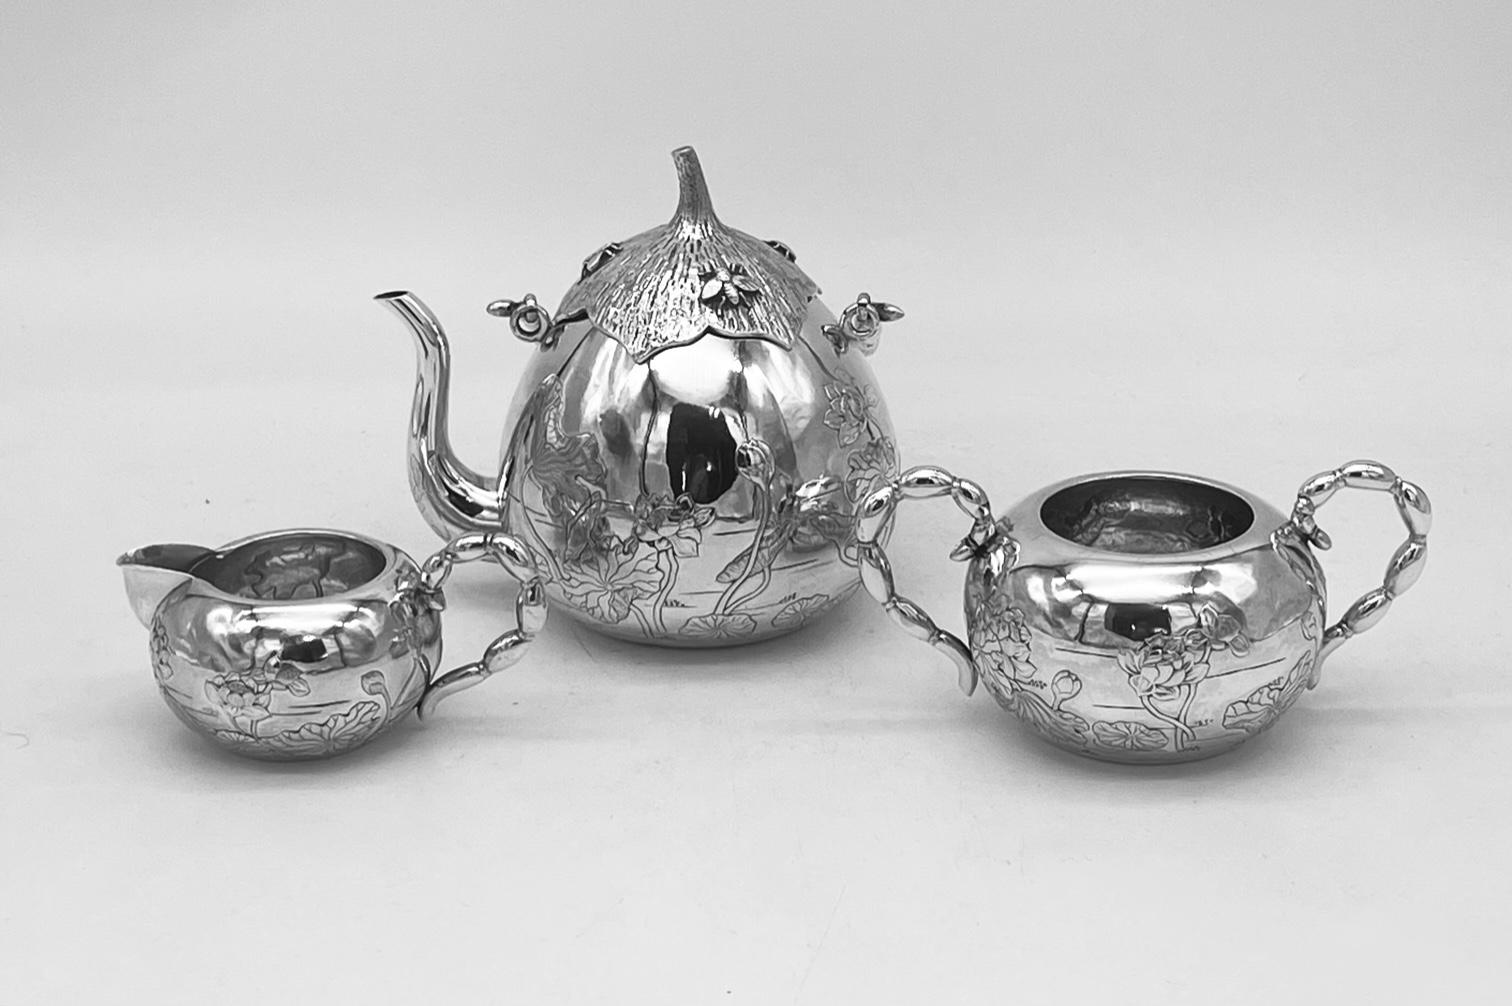 A beautiful and rare Chinese Export silver 3-piece teaset, the teapot in the form of an aubergine or eggplant, with three insects sitting on the removable cover. Each piece is embossed and chased with flowers, and the teapot has a swing handle. The